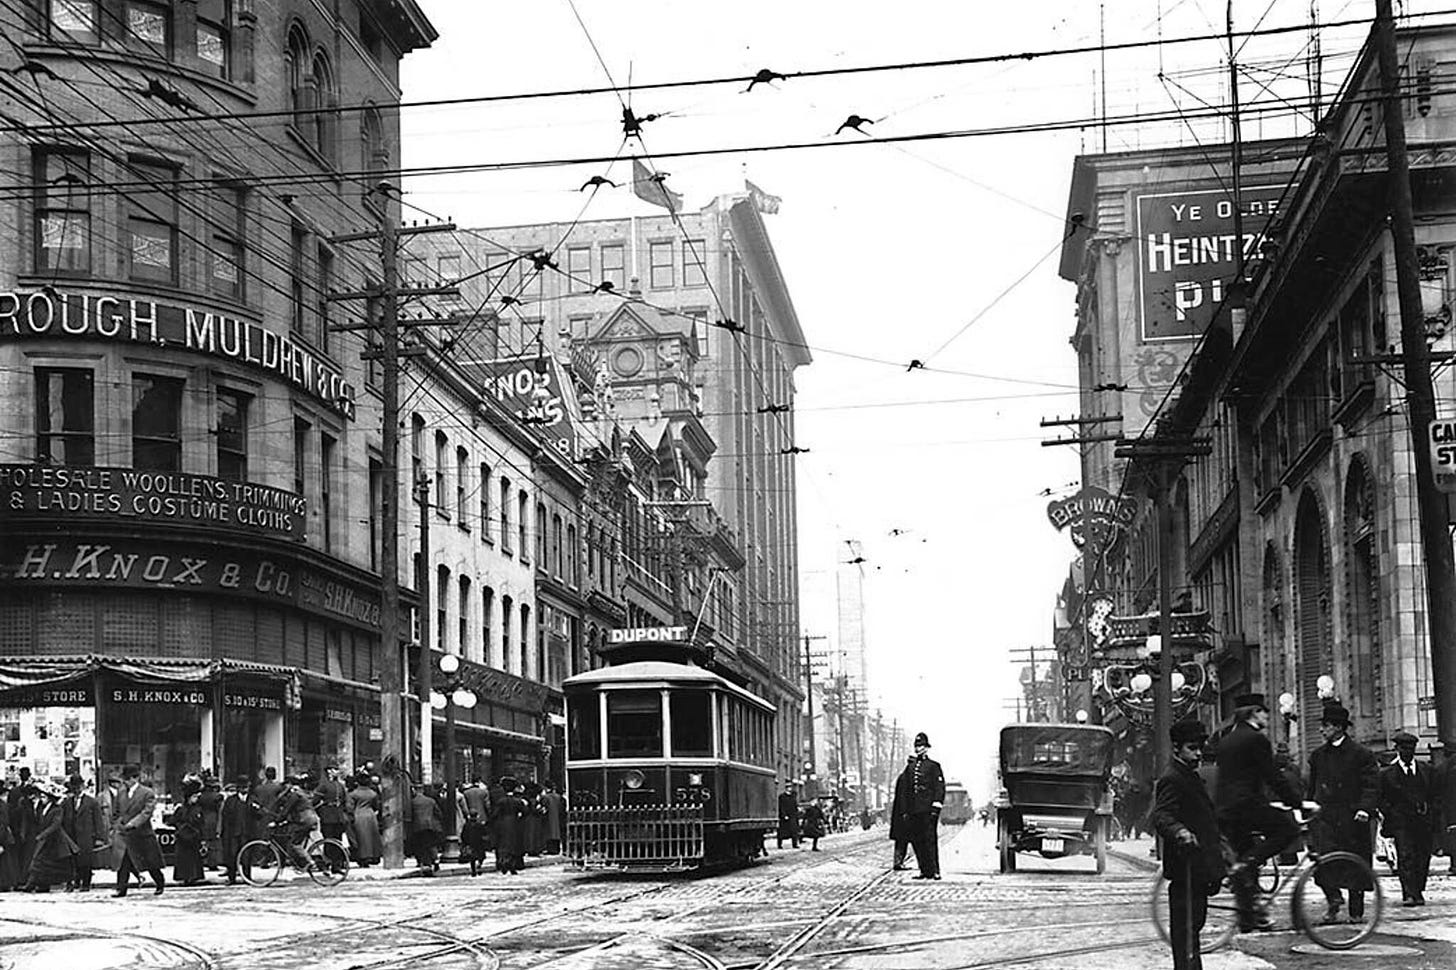 10 major Toronto intersections as they were 100 years ago